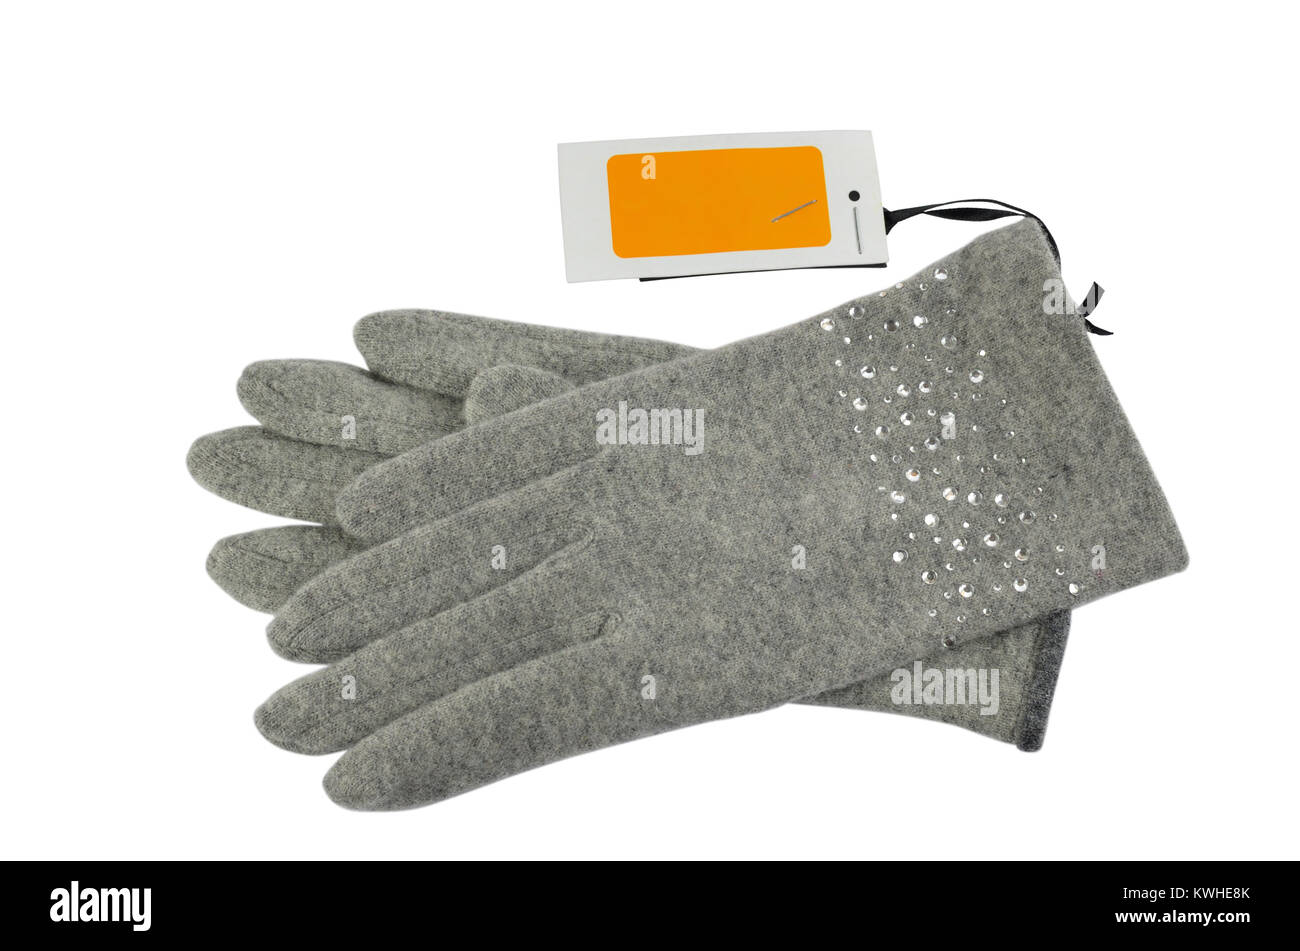 Pair of grey woolen gloves with a blank white-orange price tag beside it, on white background Stock Photo